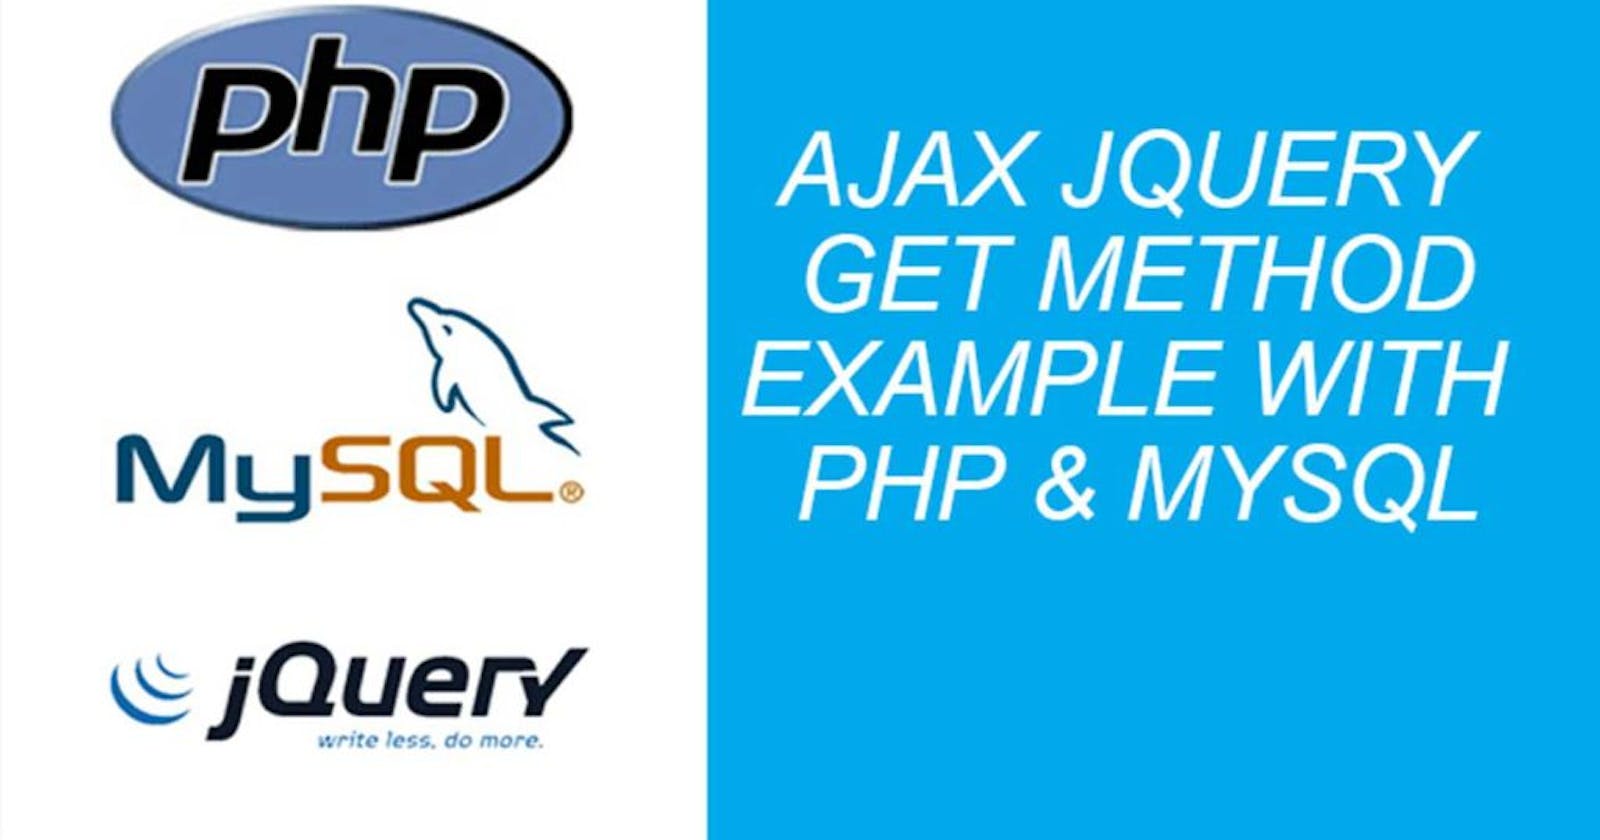 How to Capture HTML5 Form Inputs To ClearDB MySQL Database on Heroku Using PHP and JQuery AJAX